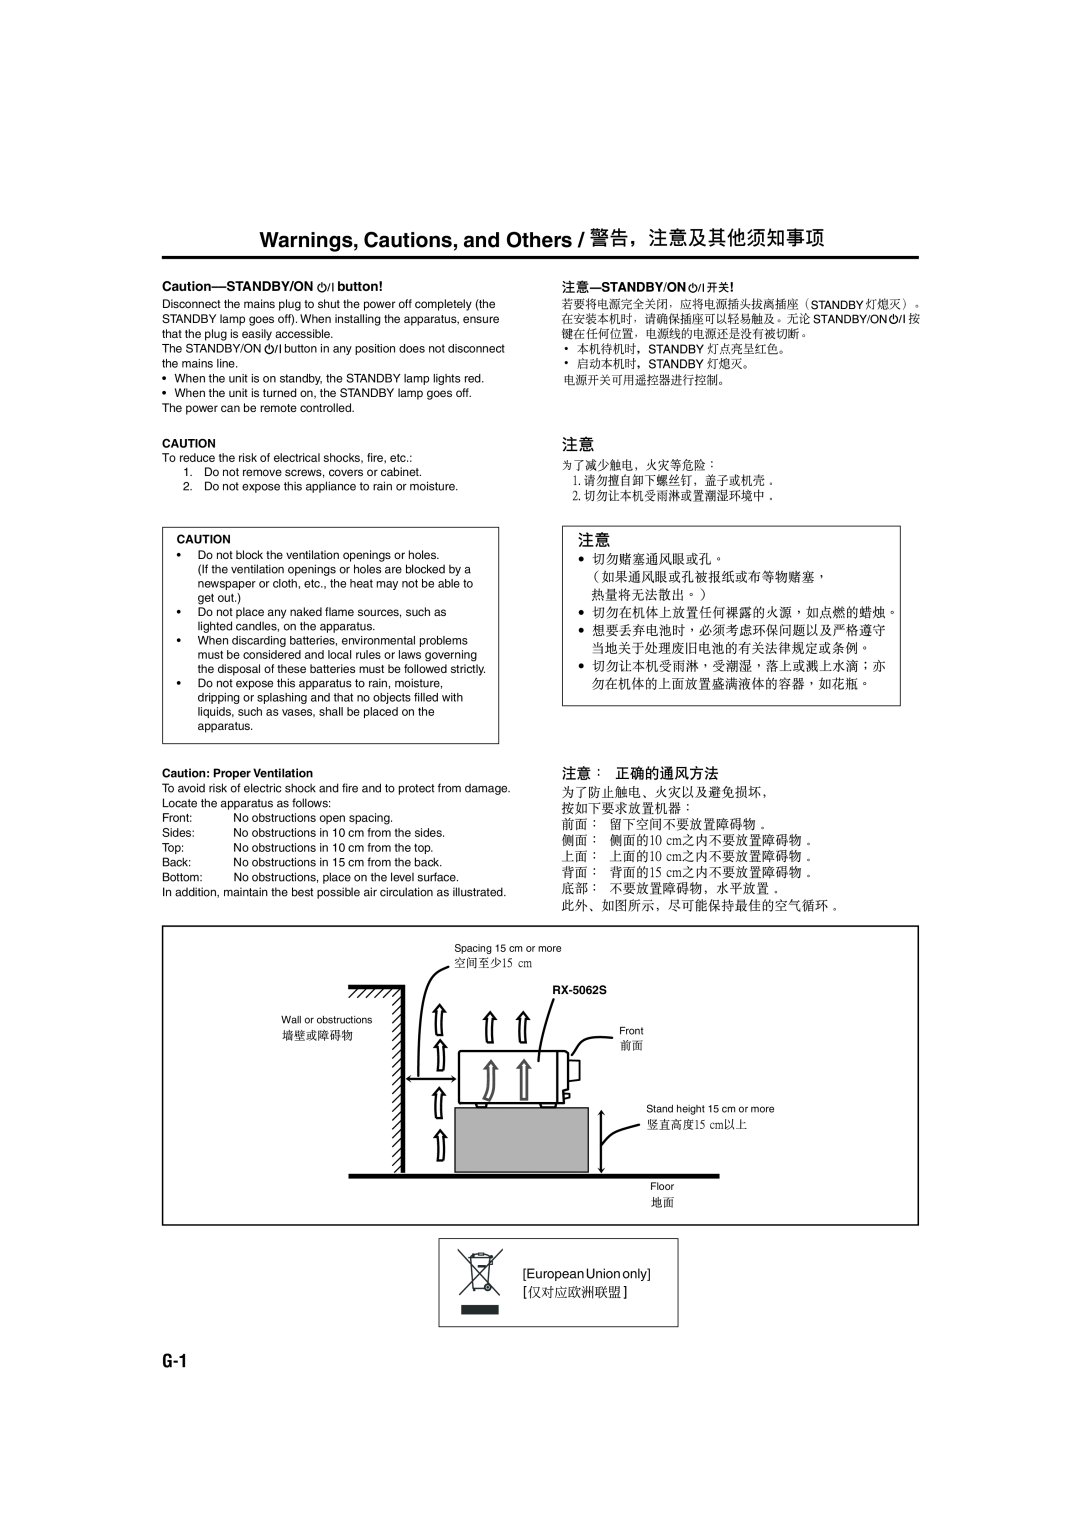 JVC LVT1507-012A manual Warnings, Cautions, and Others, Caution Proper Ventilation, RX-5062S 